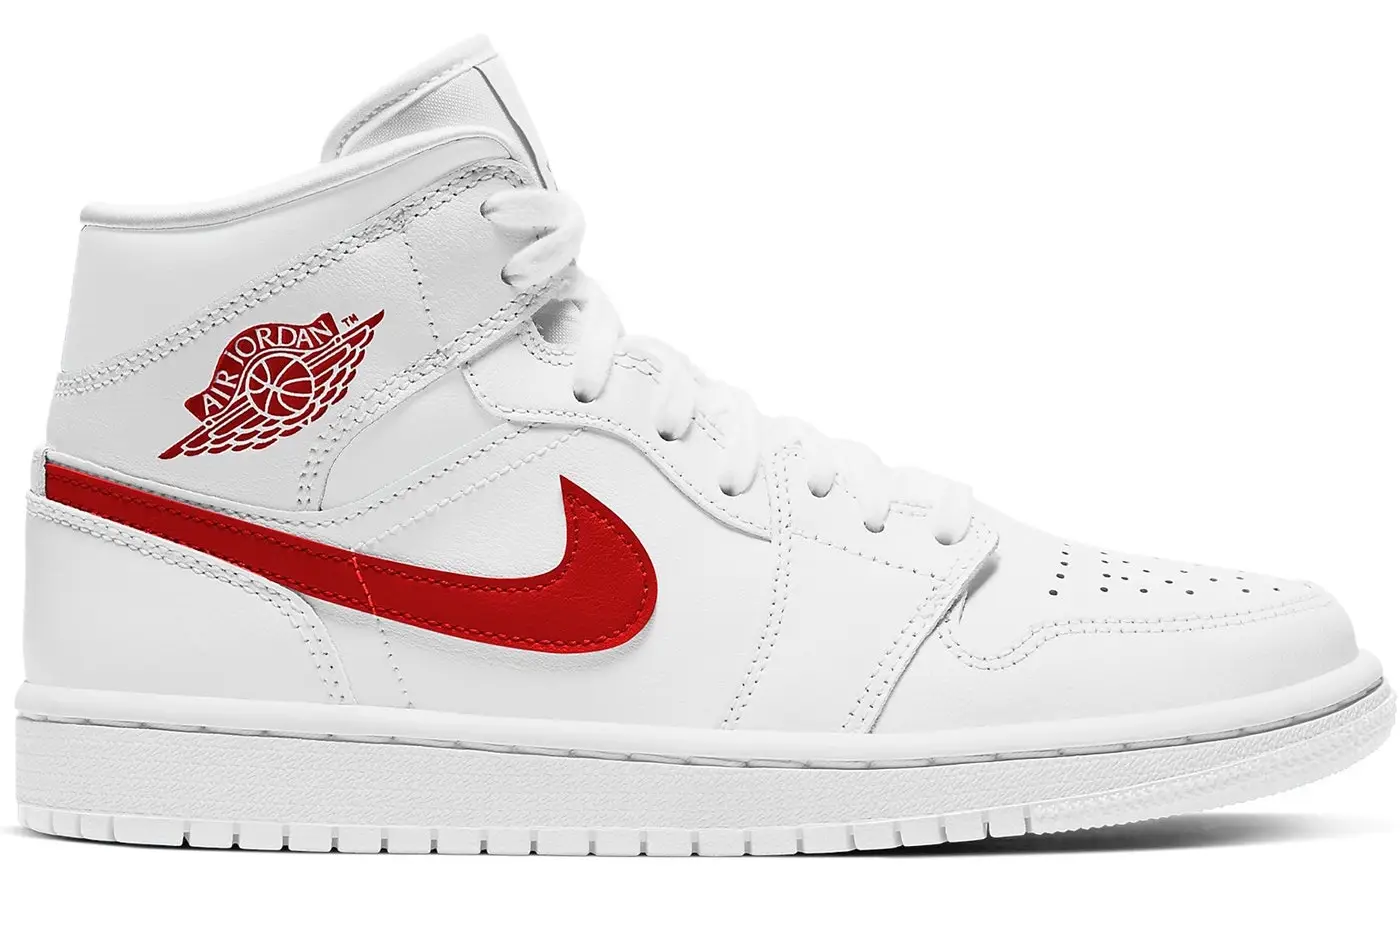 The Style Series: Styling The Air Jordan 1 'University Red' With ...